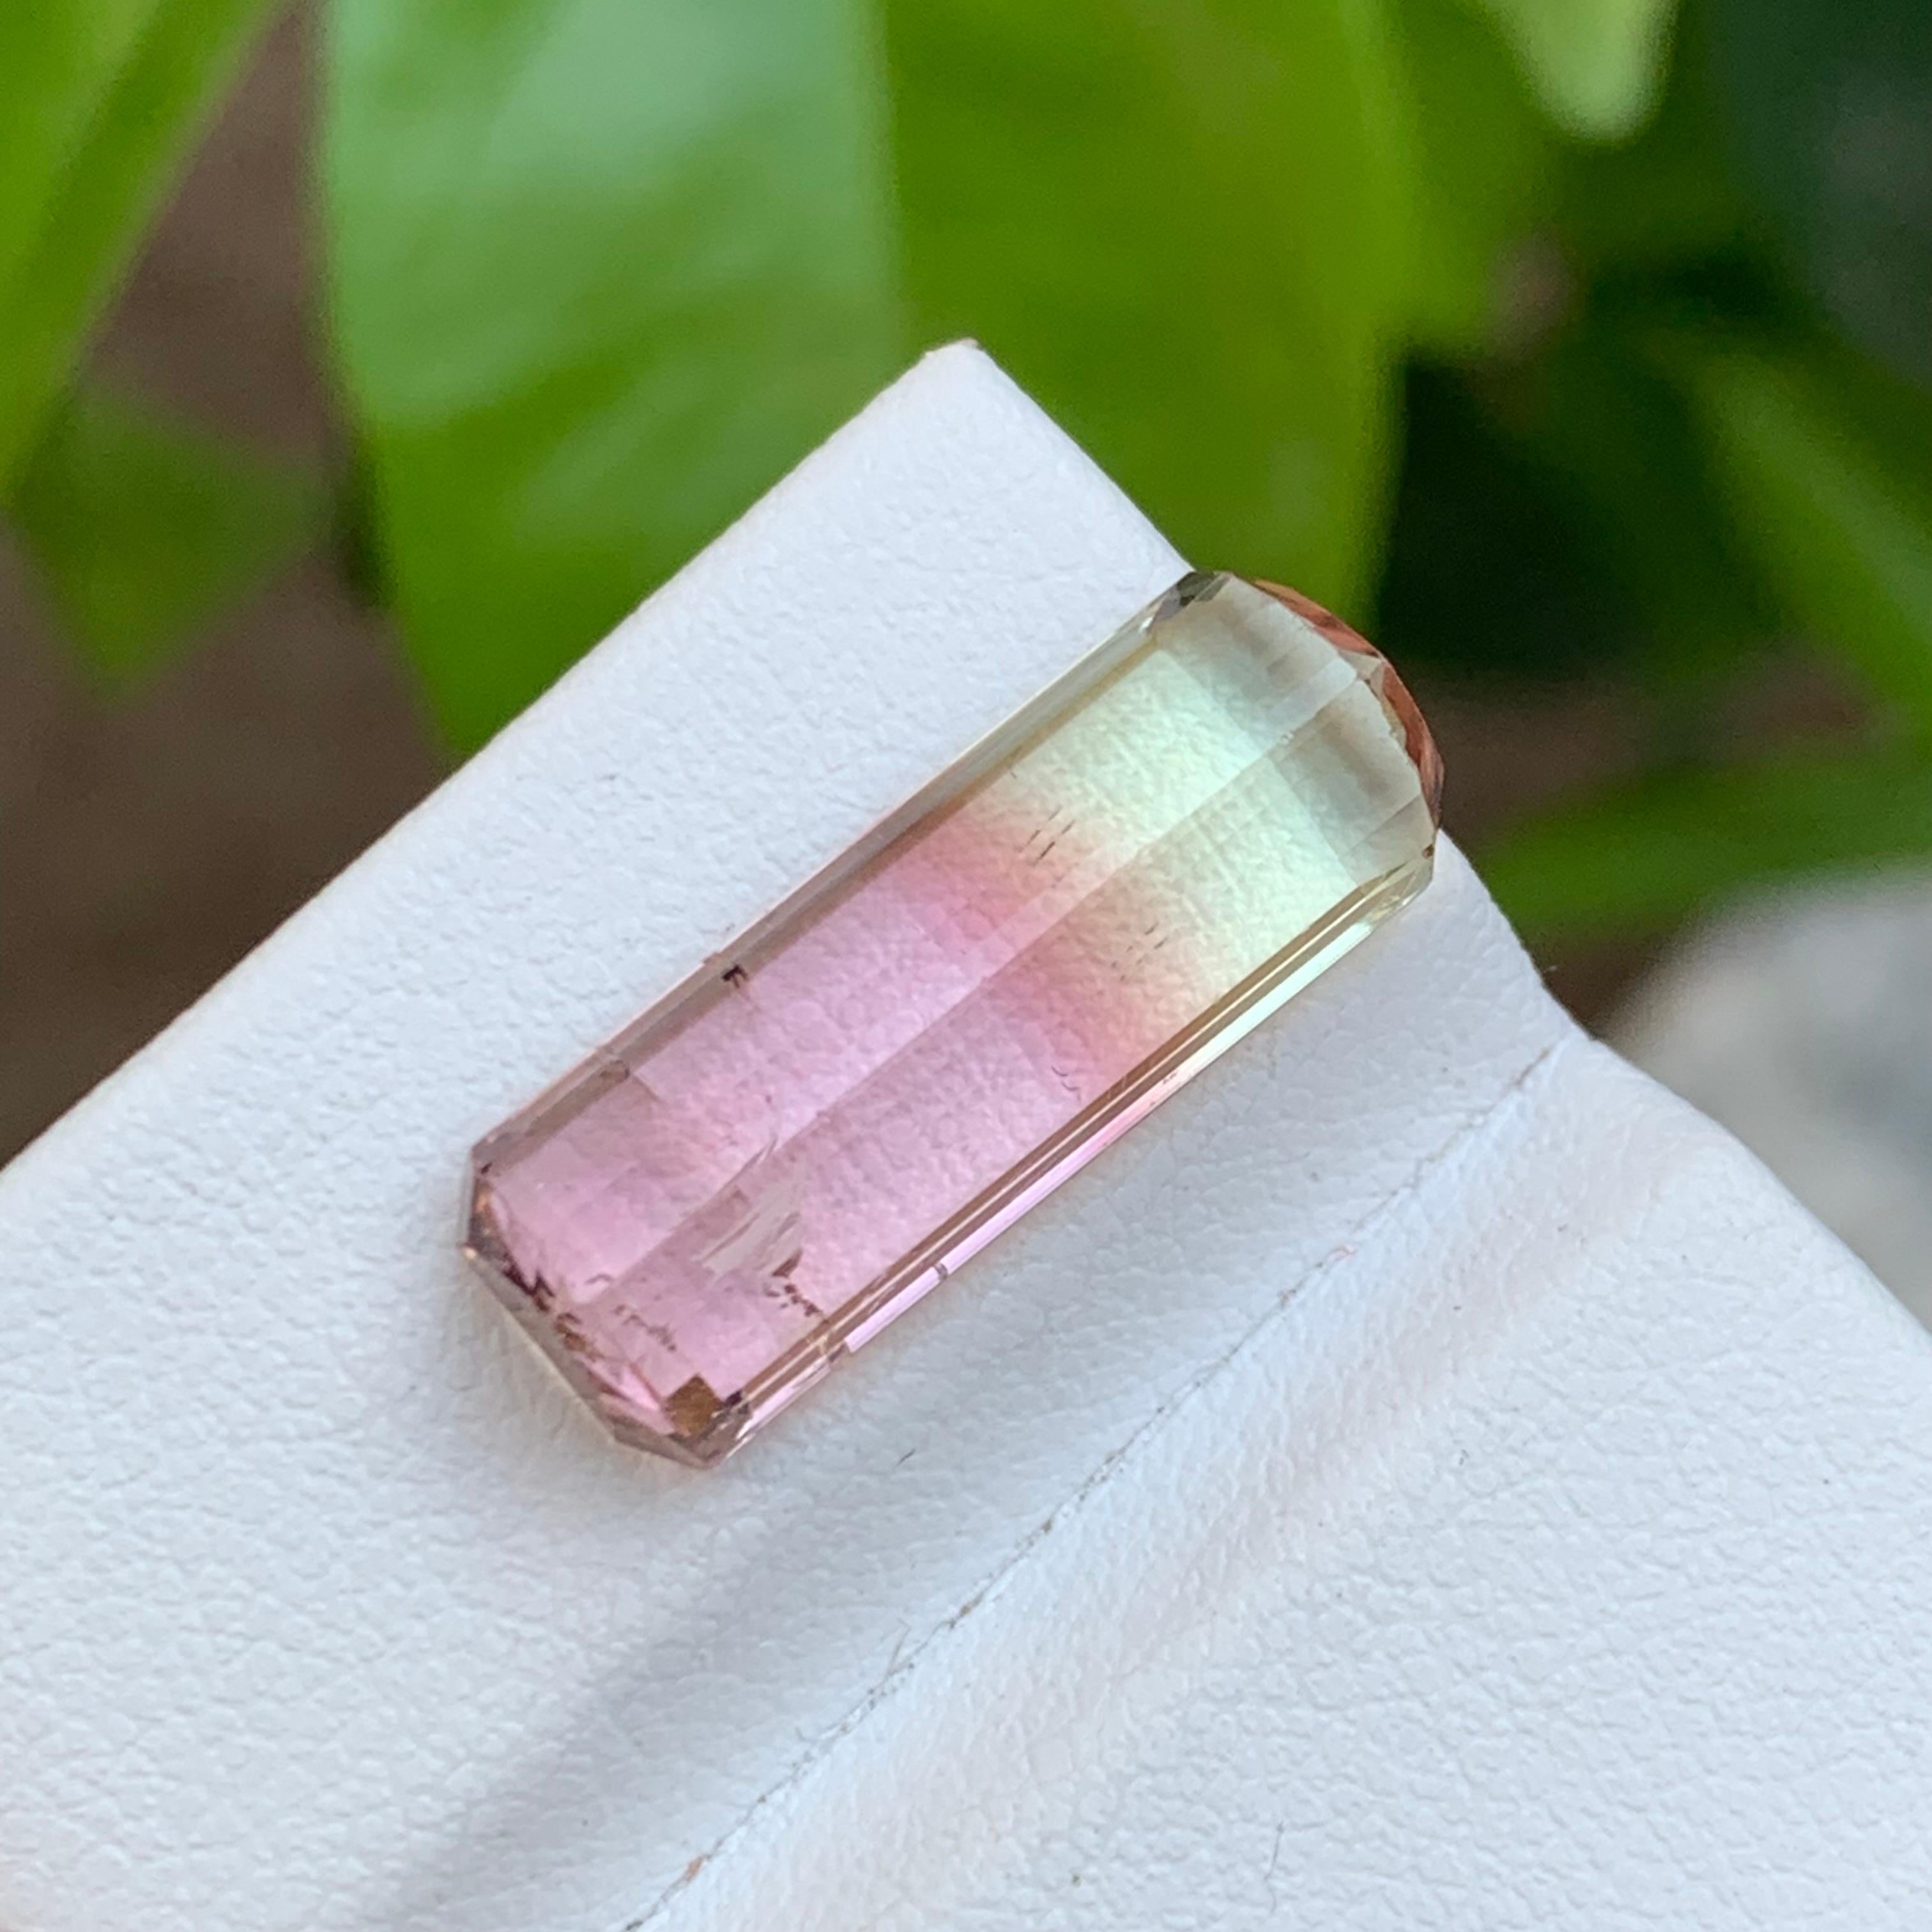 Contemporary Rare Pink & Pale Green Bicolor Tourmaline Gemstone, 8.35 Ct Emerald Cut-Necklace For Sale